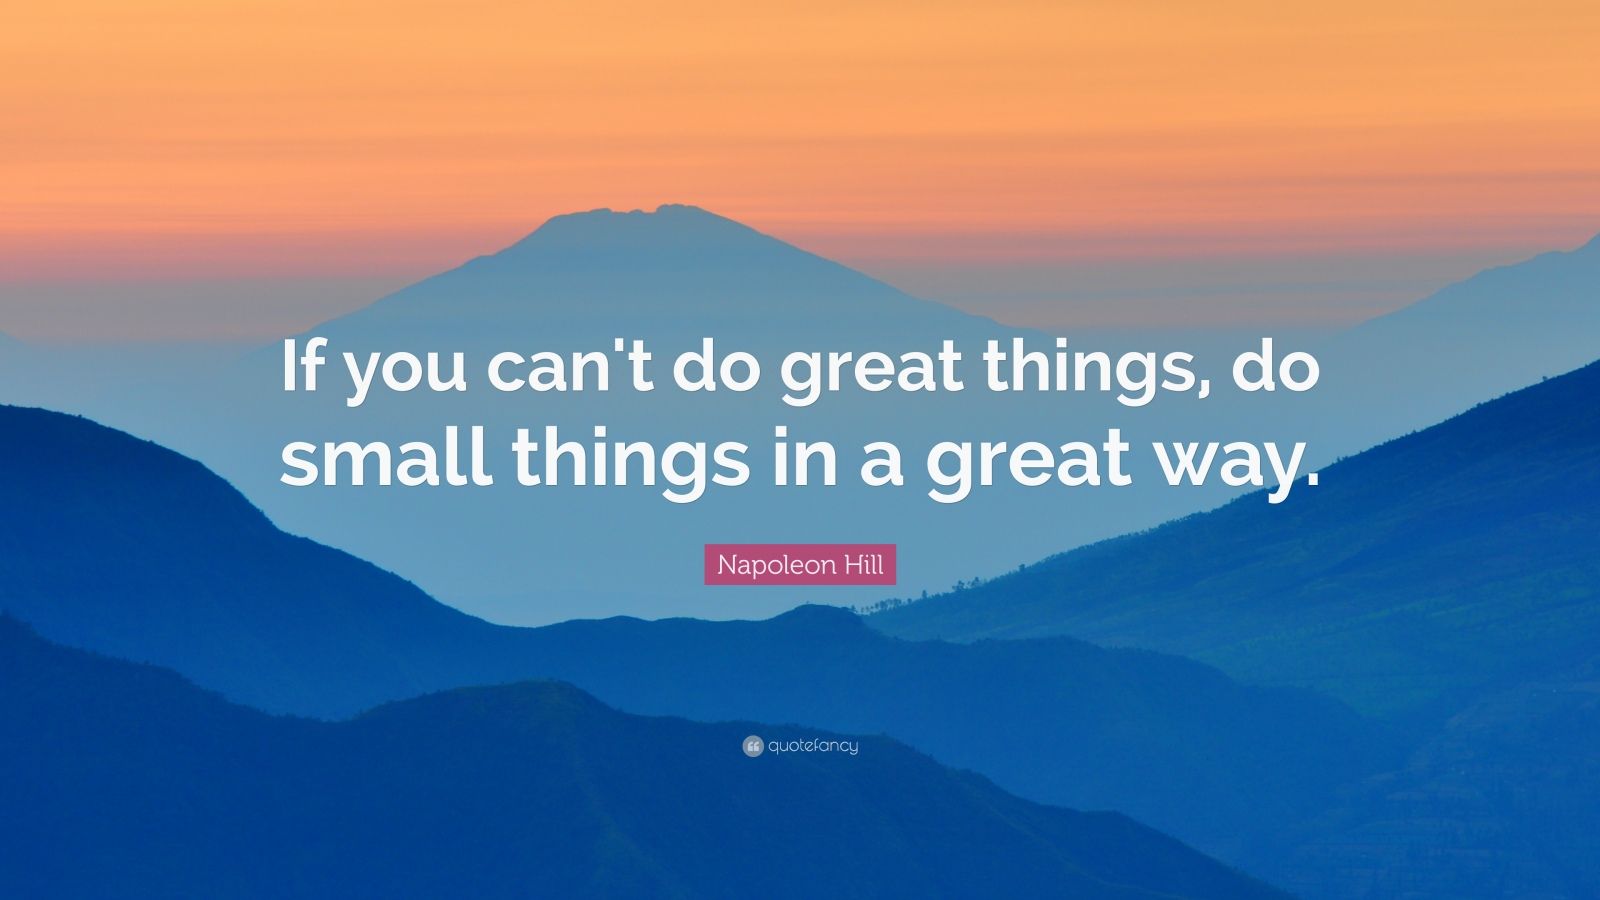 Napoleon Hill Quote: “If you can't do great things, do small things in